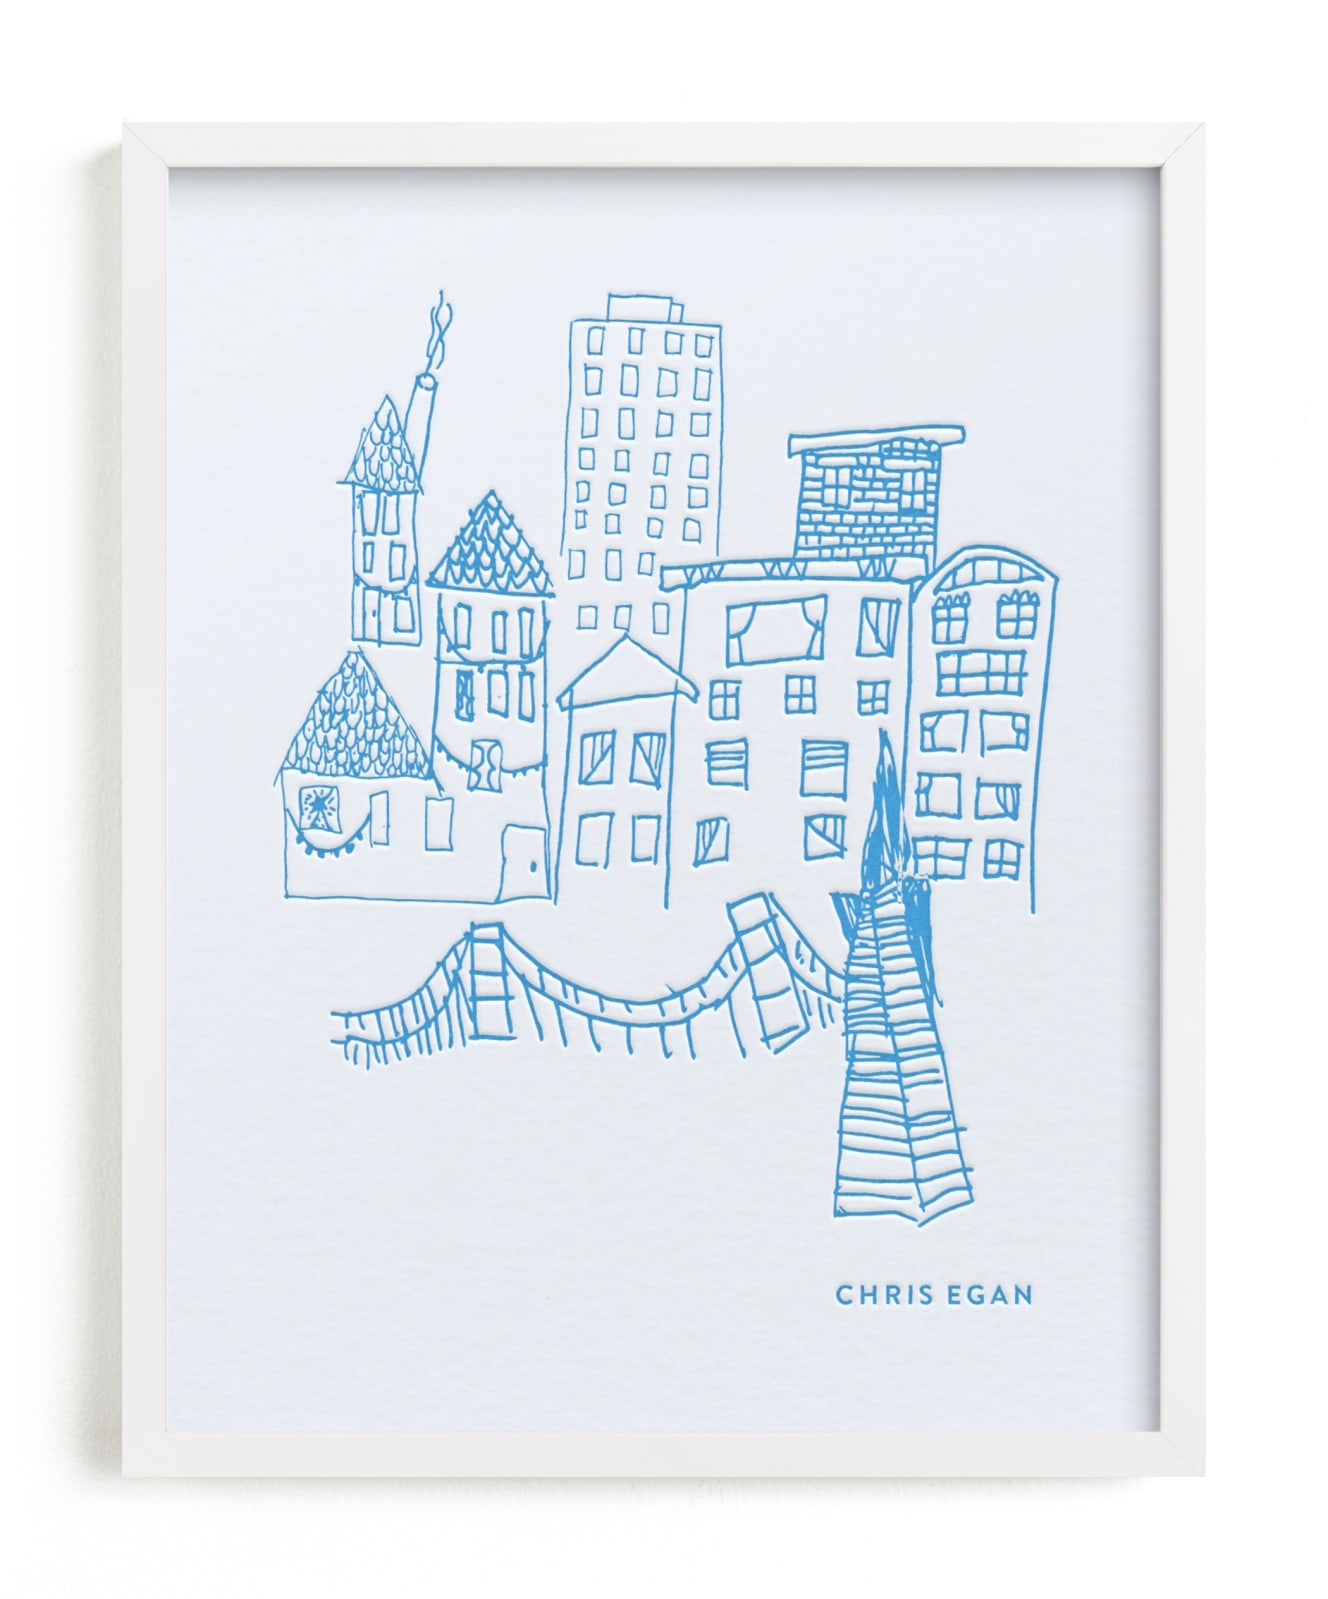 This is a blue photos to art by Minted called Your Drawing as Letterpress Art Print.